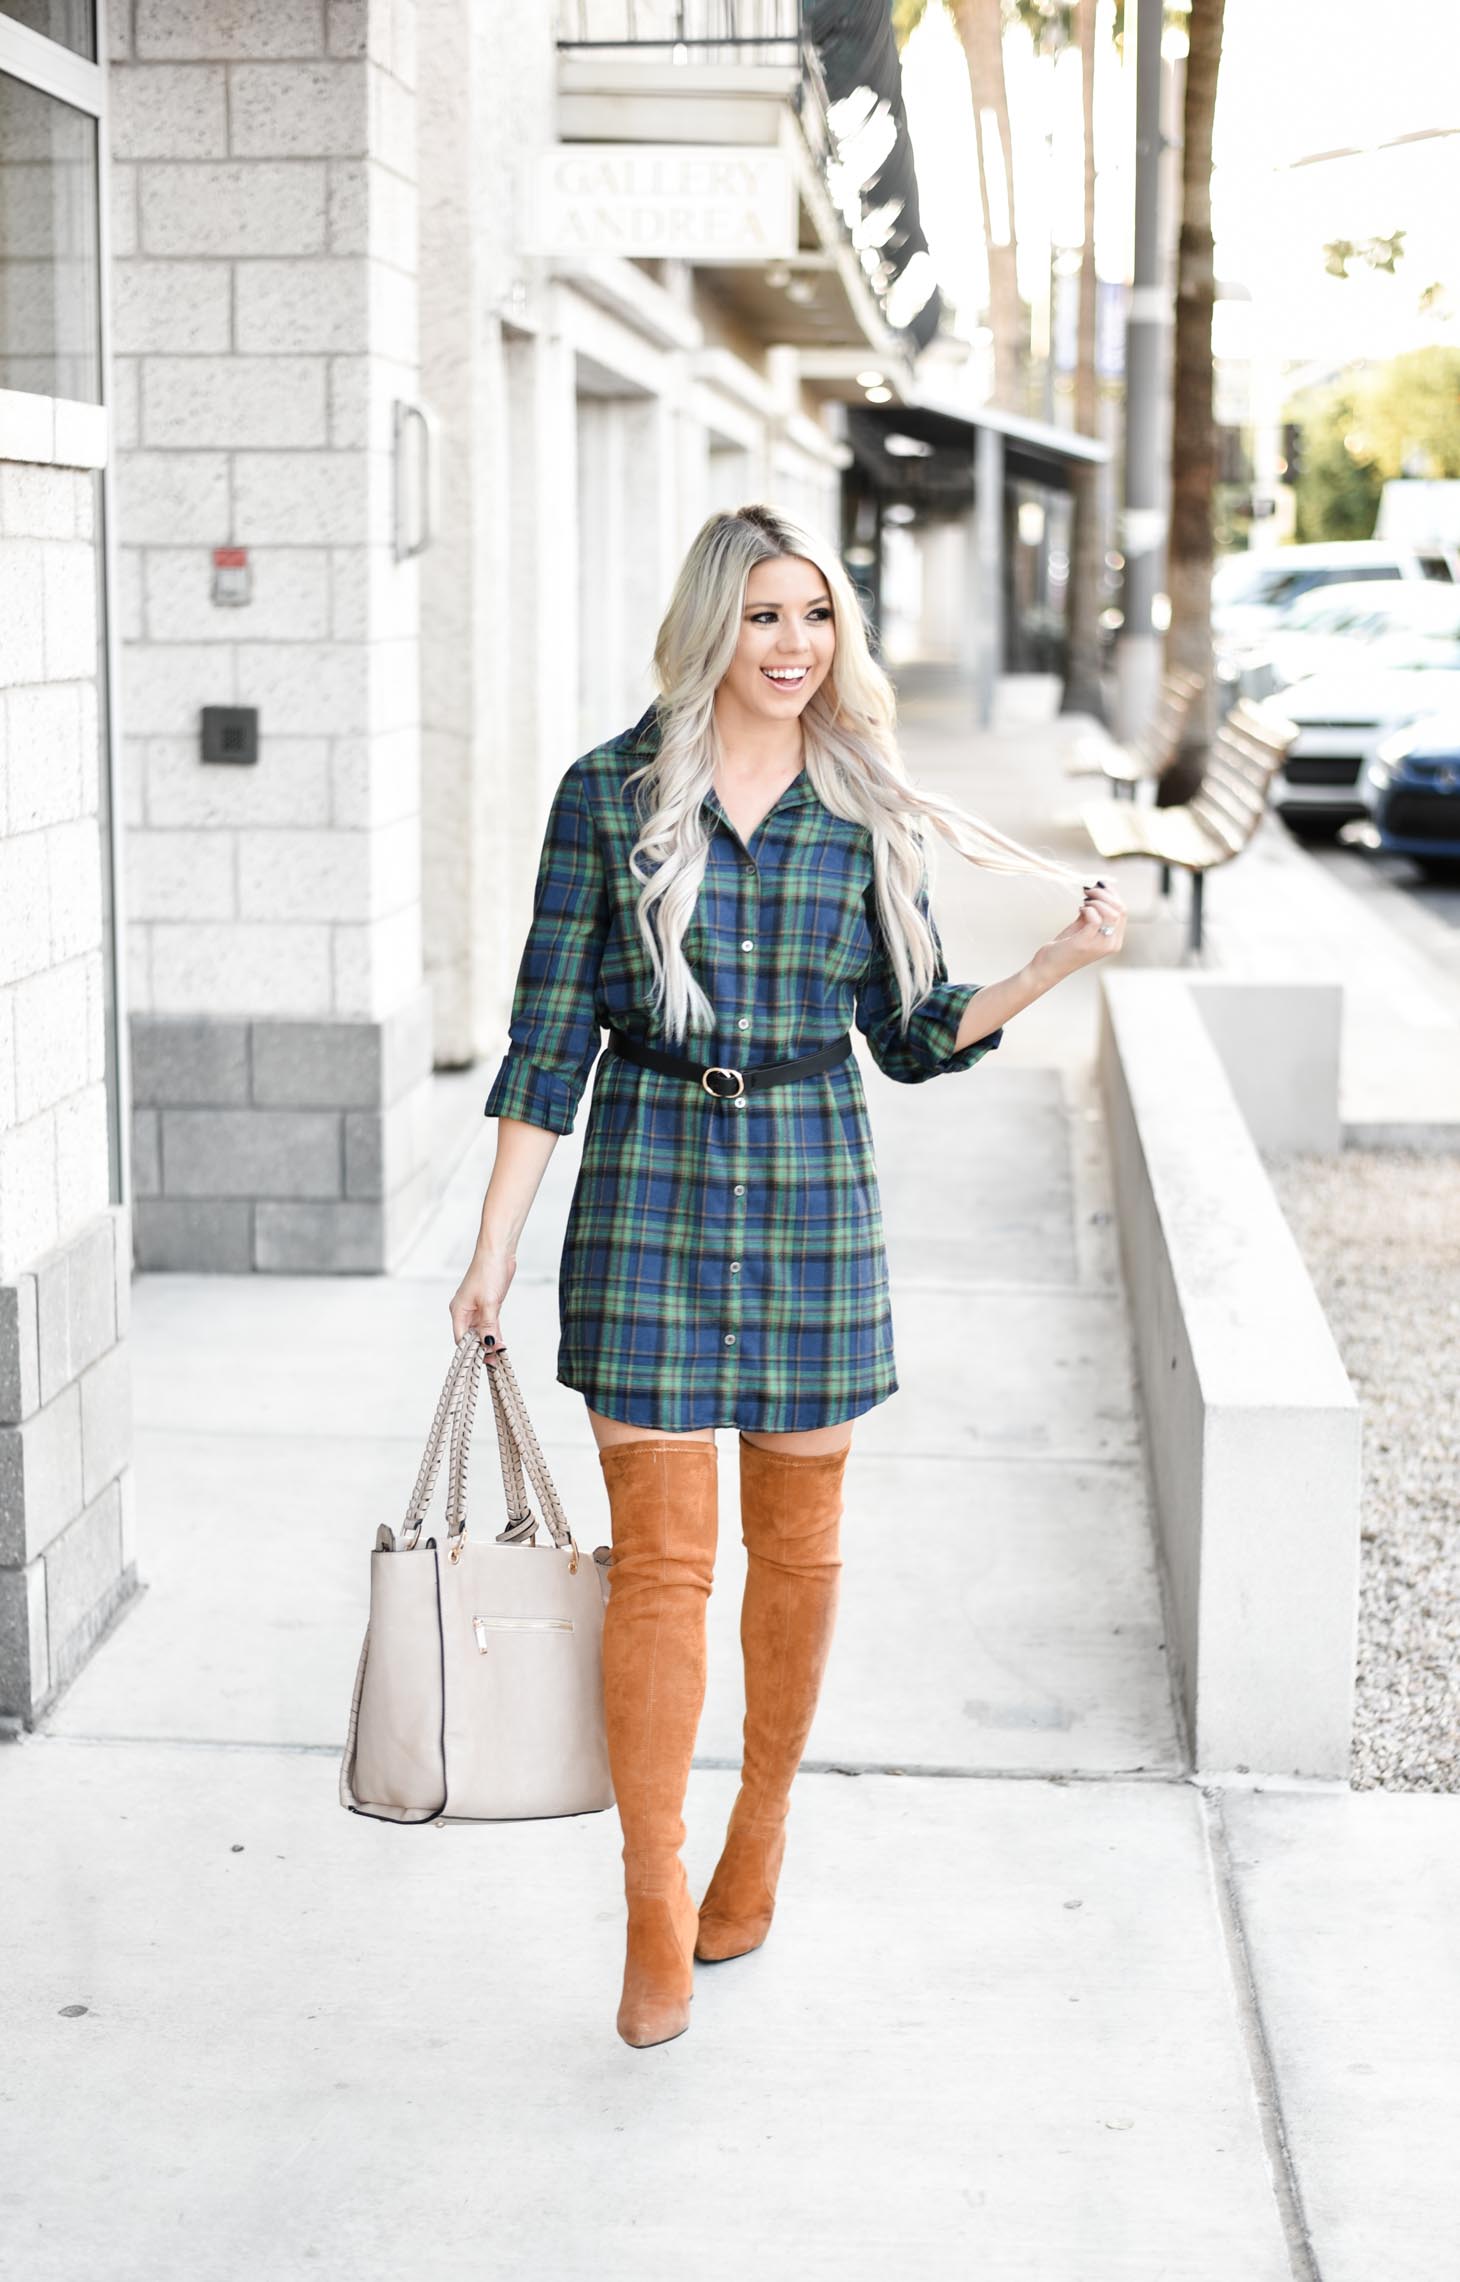 Erin Elizabeth of Wink and a Twirl shares a few of her favorite fall styles this week